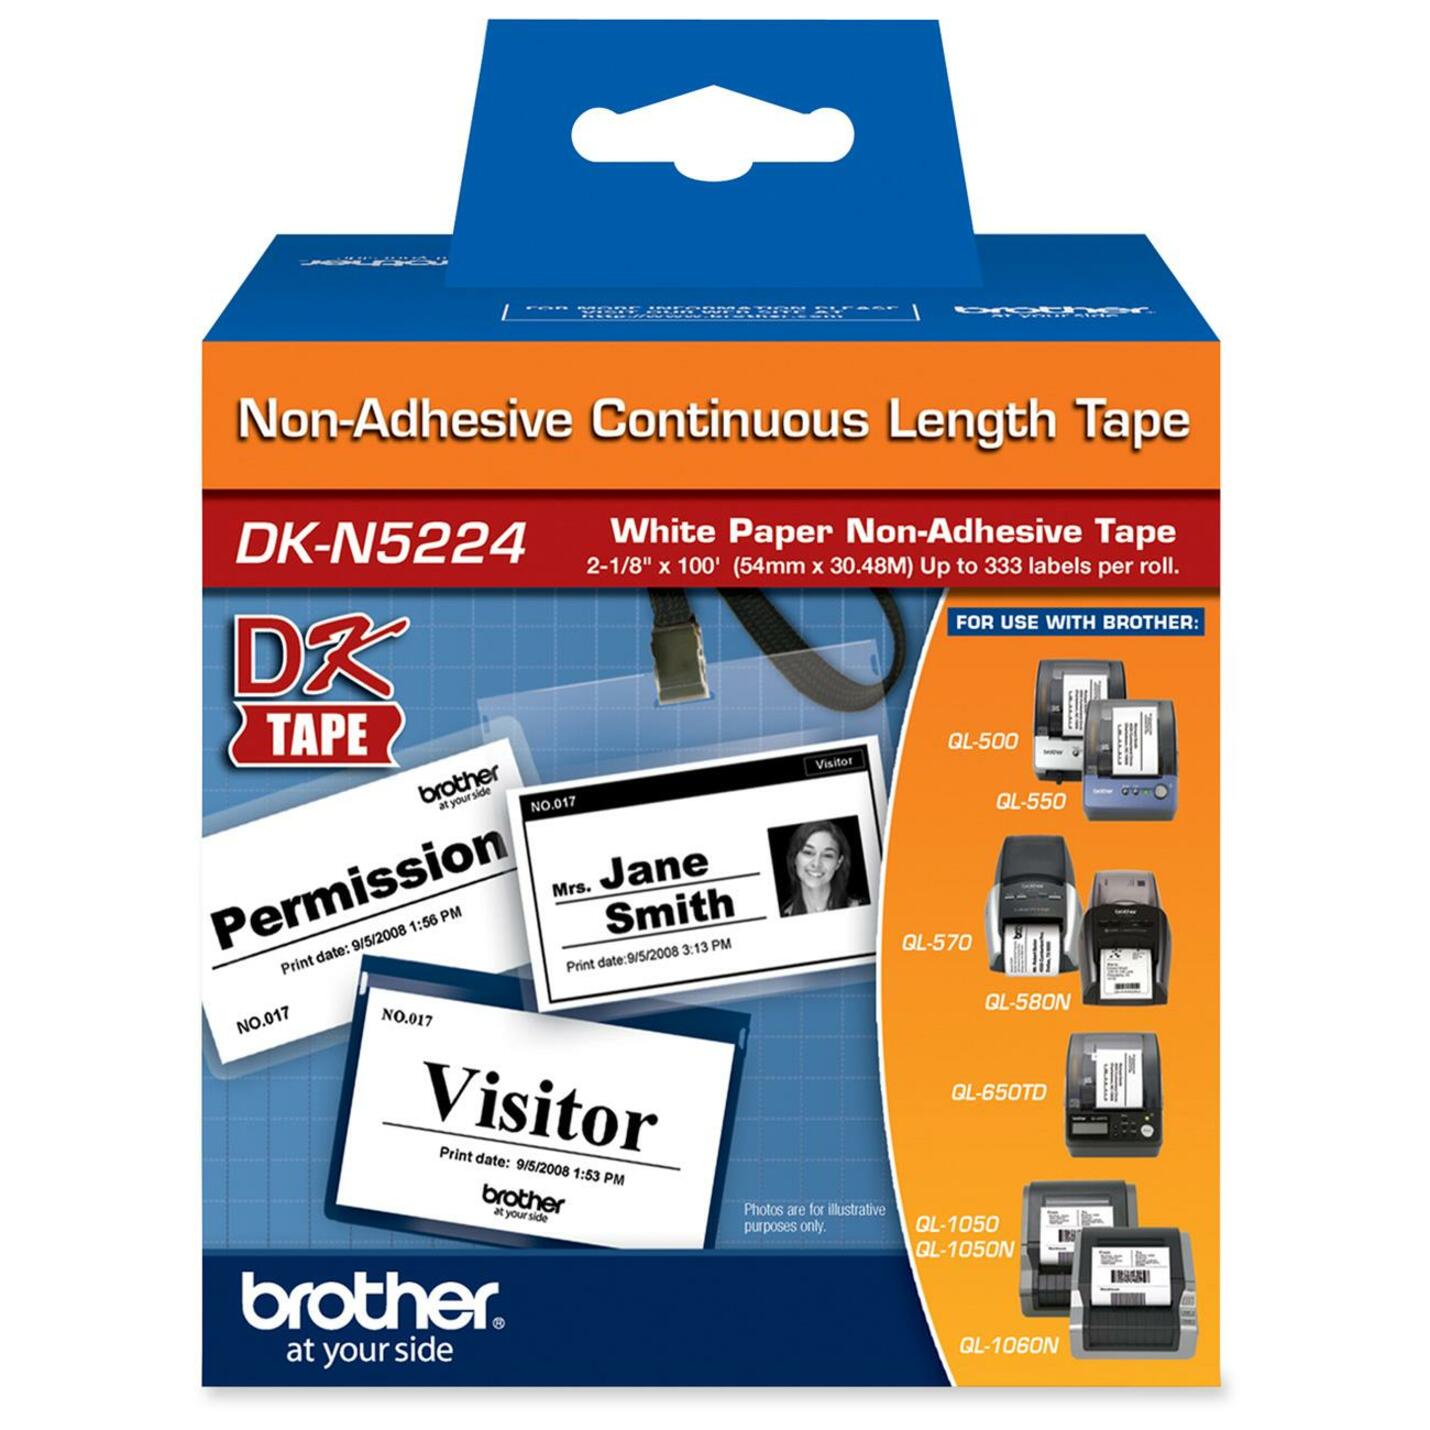 Brother DKN5224 DK Series Non-adhesive Continuous Paper Tape Roll, 2 1/10" Label Width, Black/White